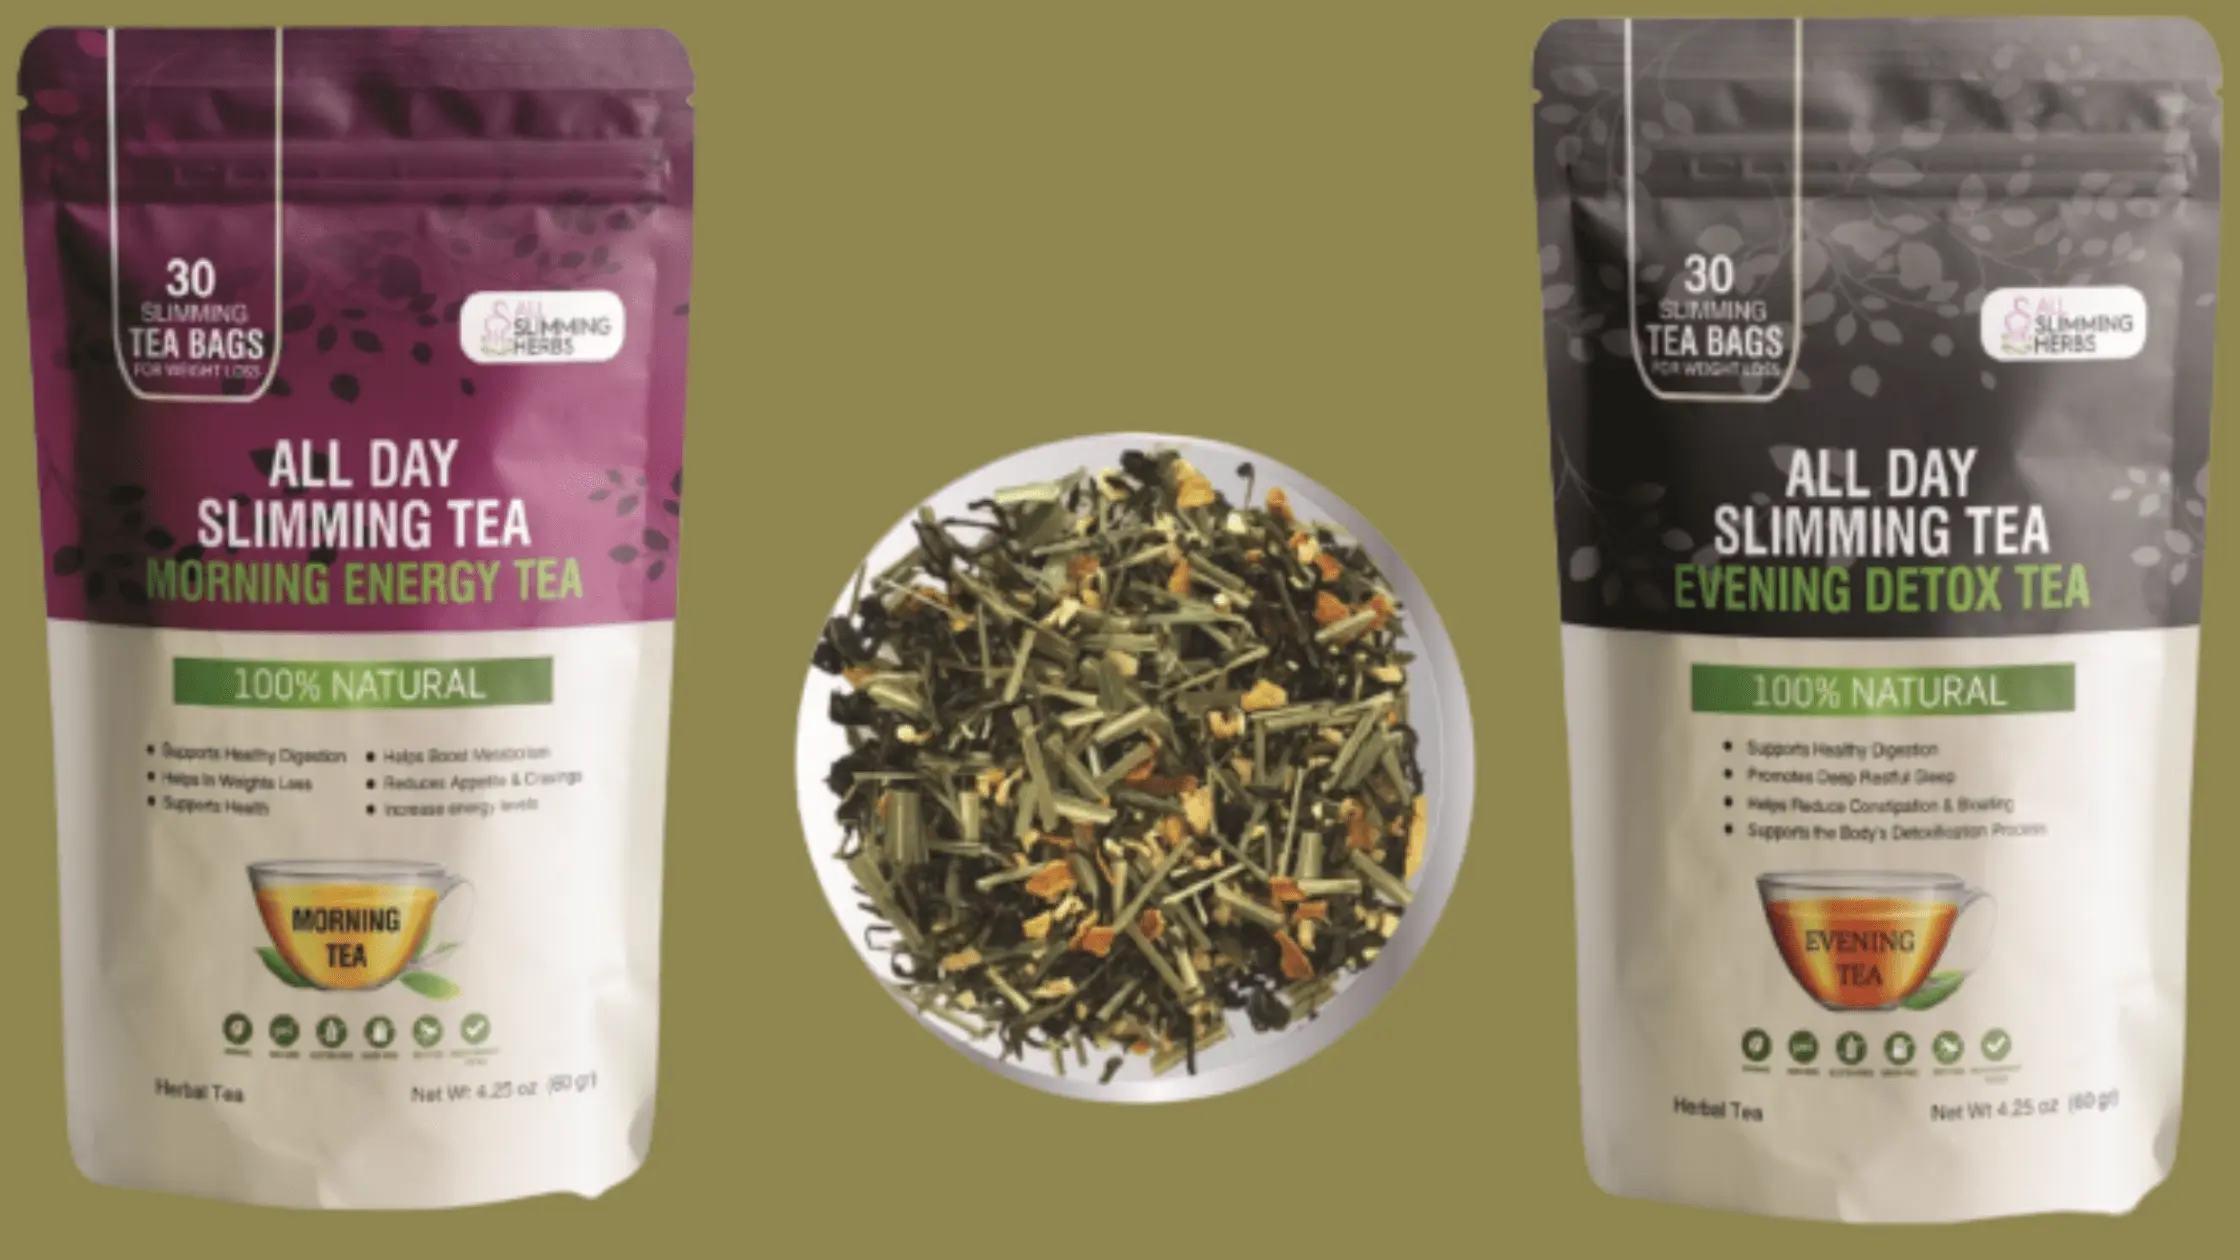 All Day Slimming Tea Review